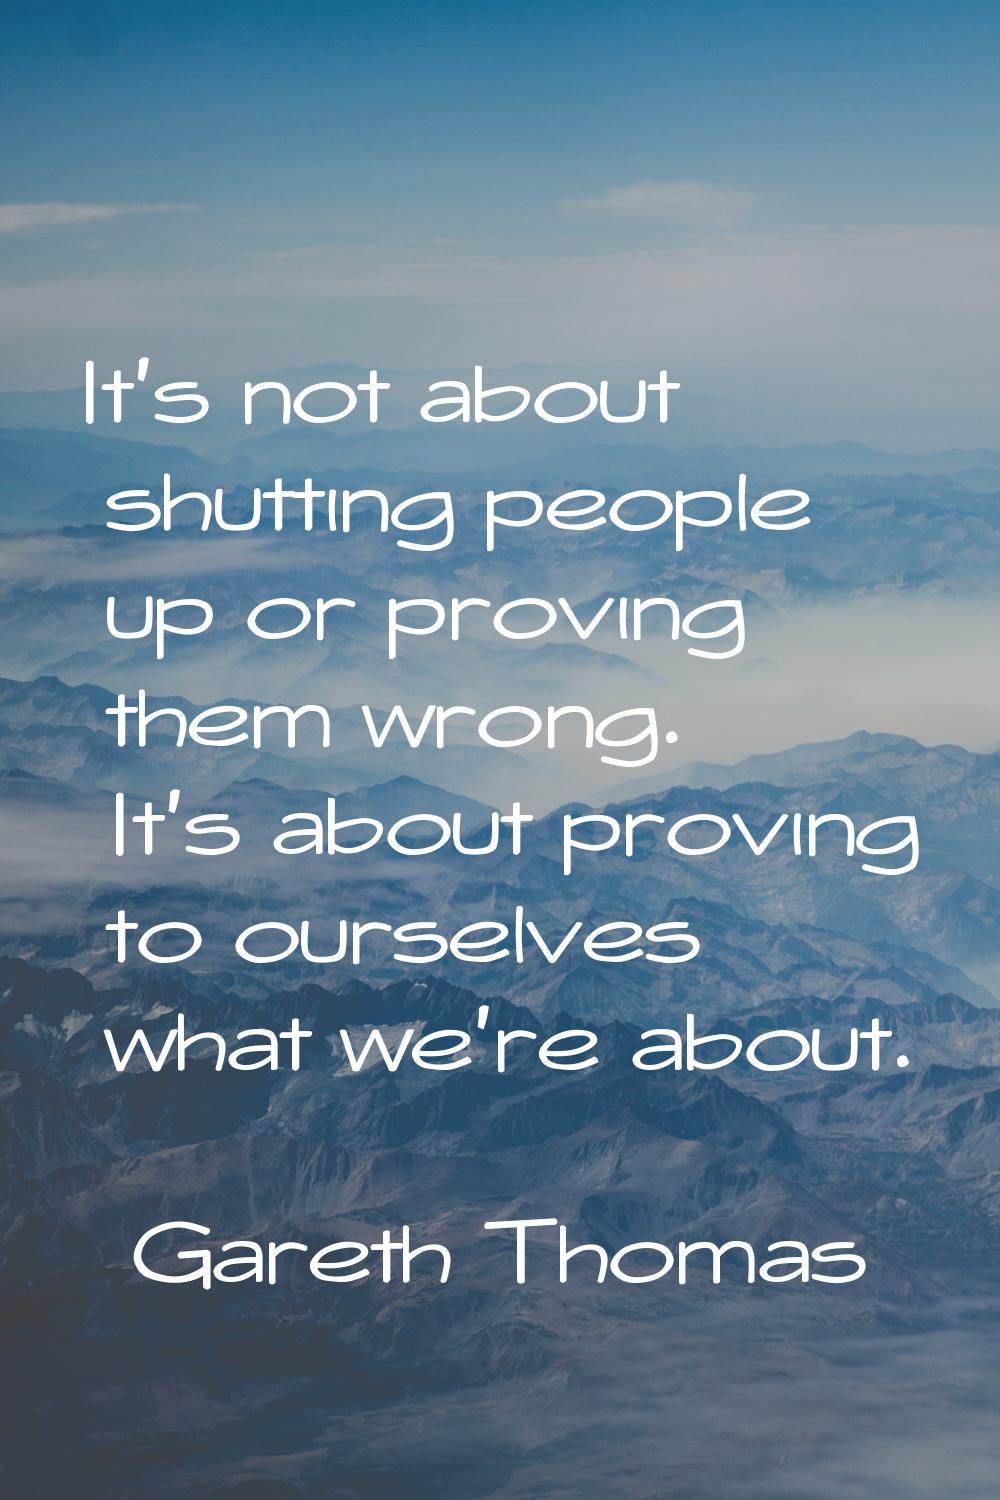 It's not about shutting people up or proving them wrong. It's about proving to ourselves what we're